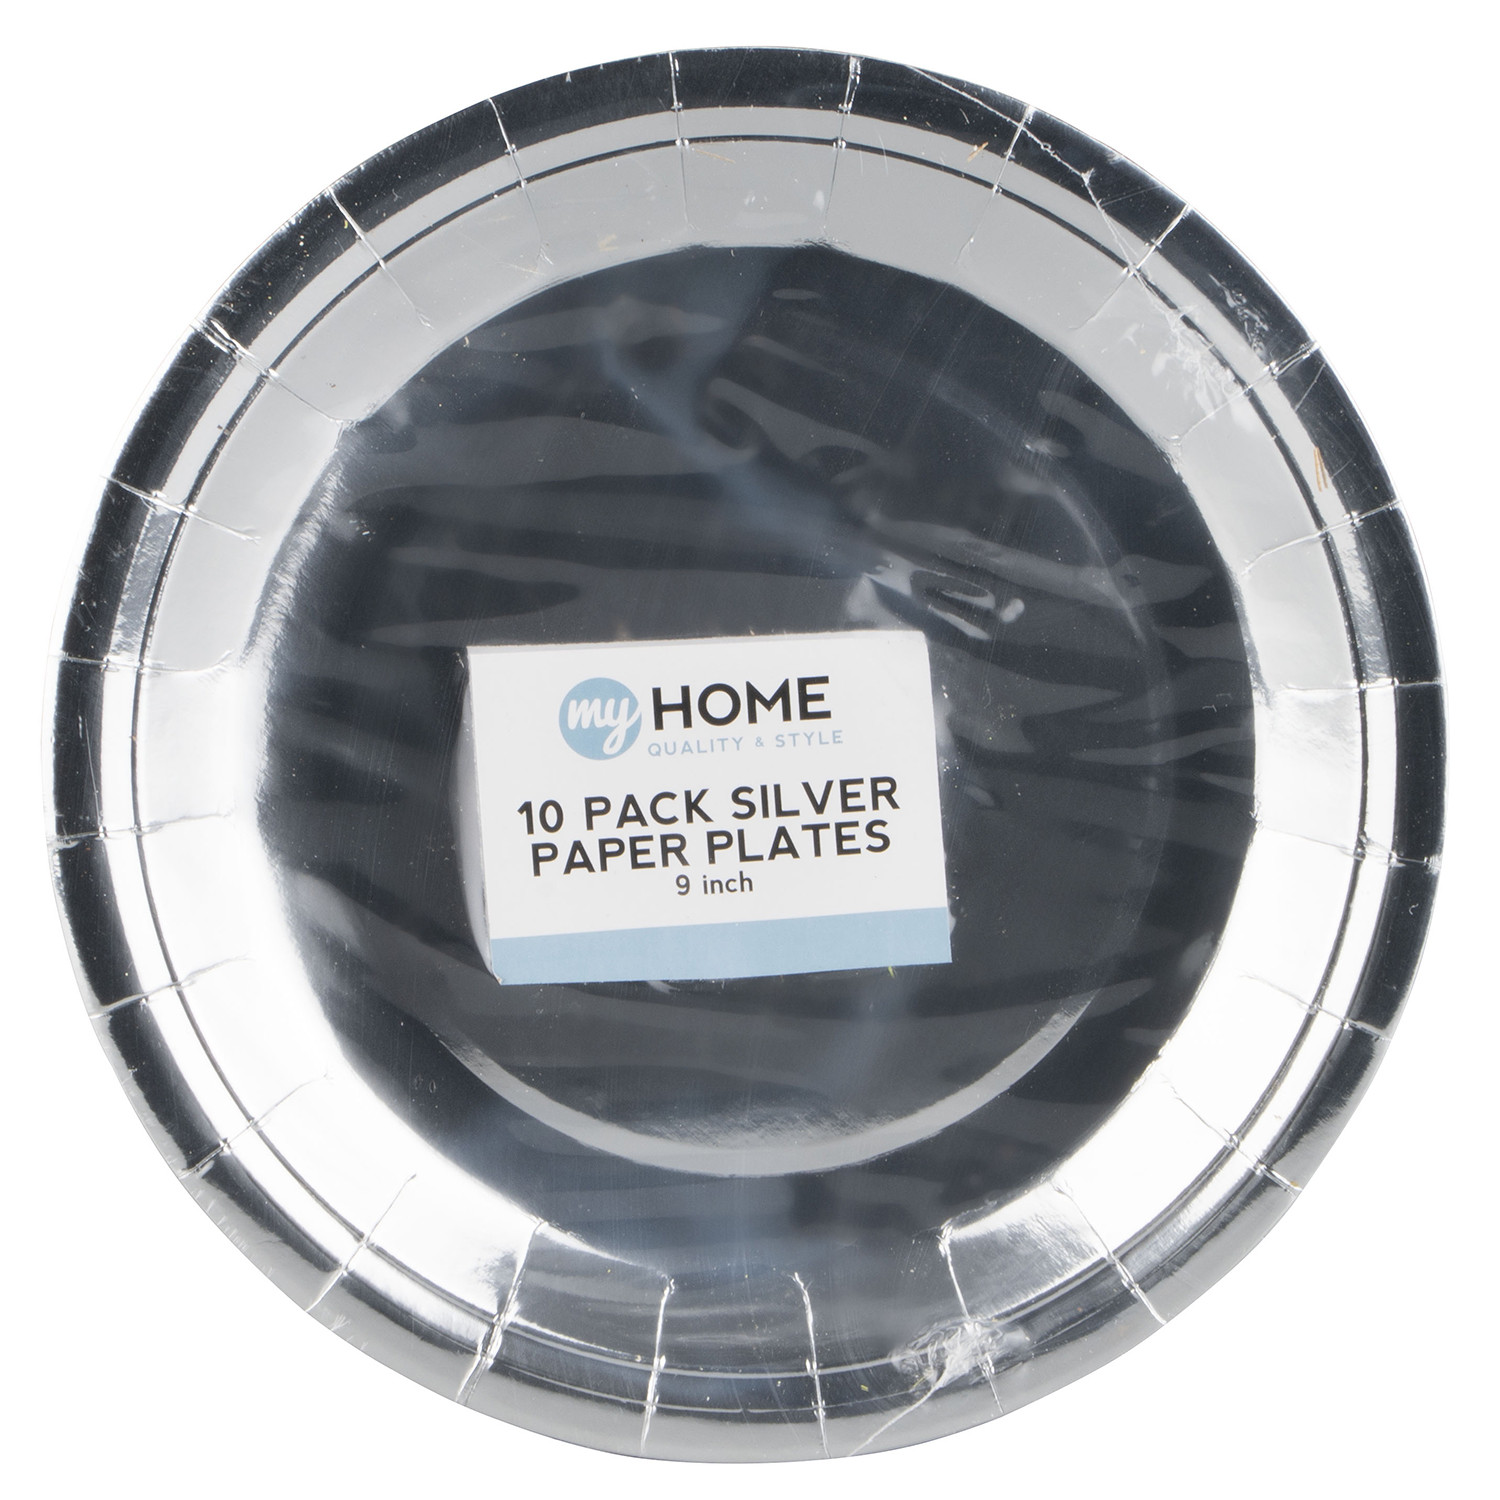 My Home Silver Paper Plates 10 Pack Image 2